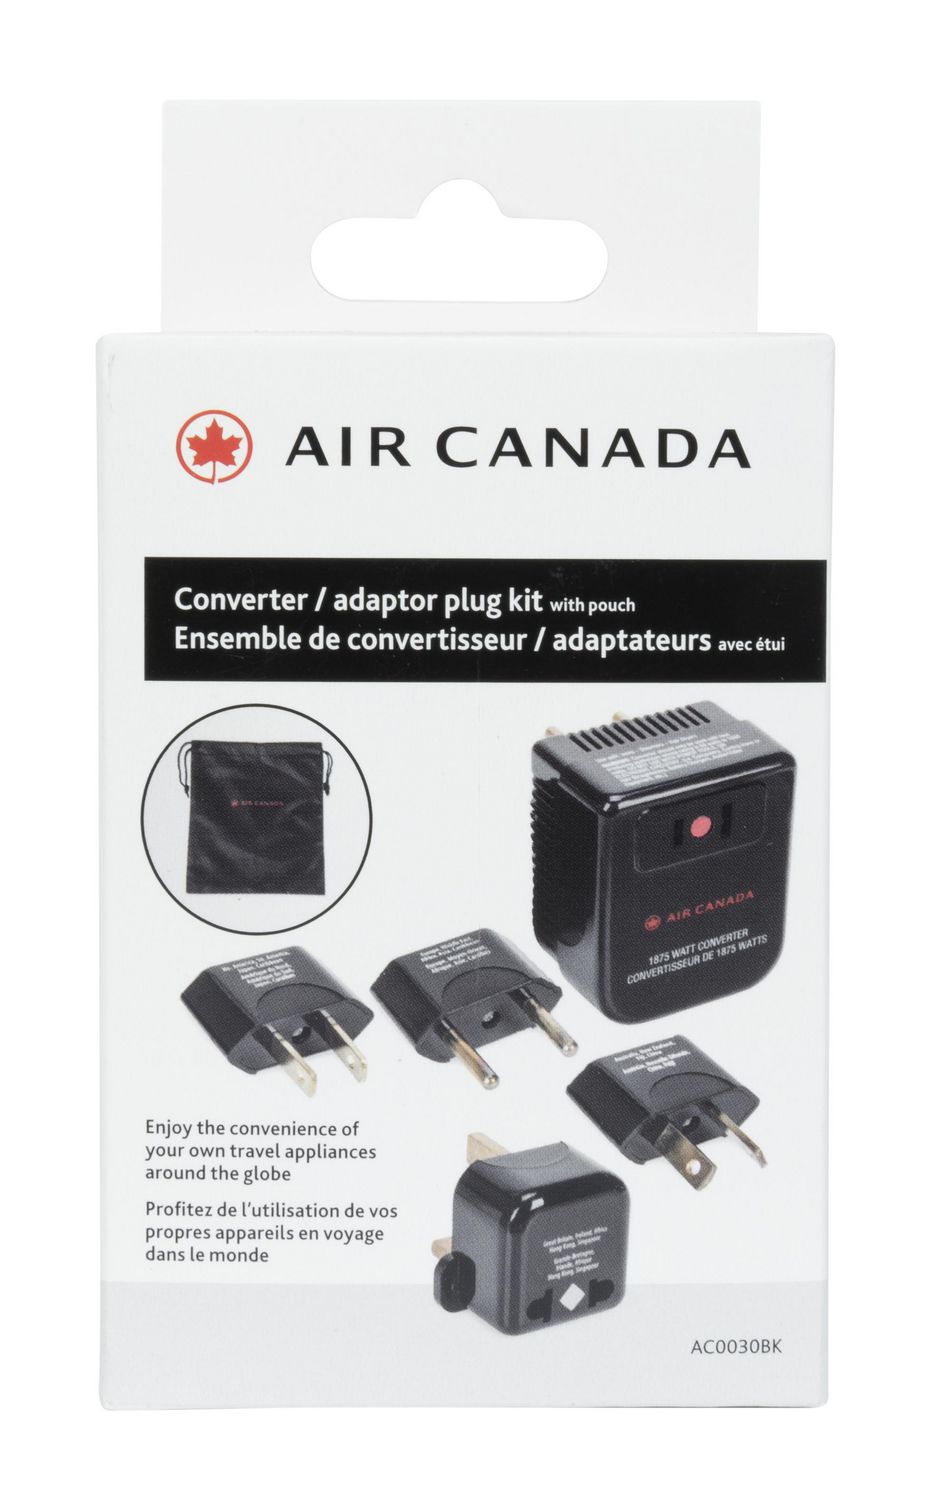 Air Canada Converter / Adapter Plug Kit with Pouch, 7 pieces